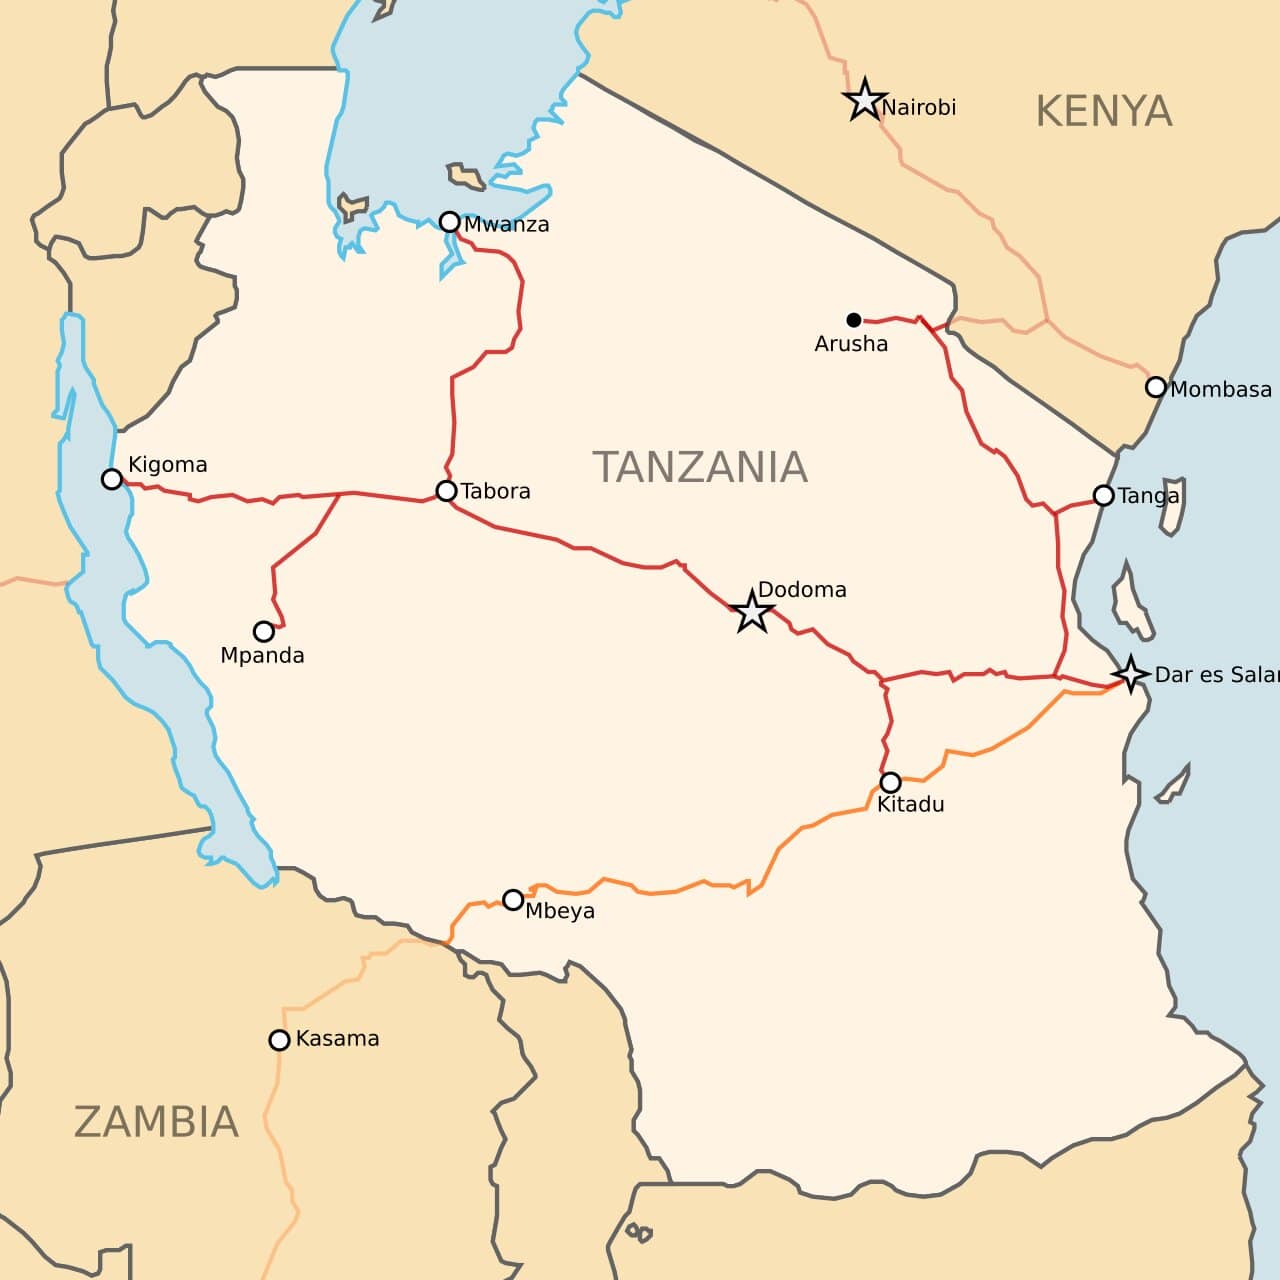 A map showing the route of the TAZARA Railway in Tanzania (in orange).